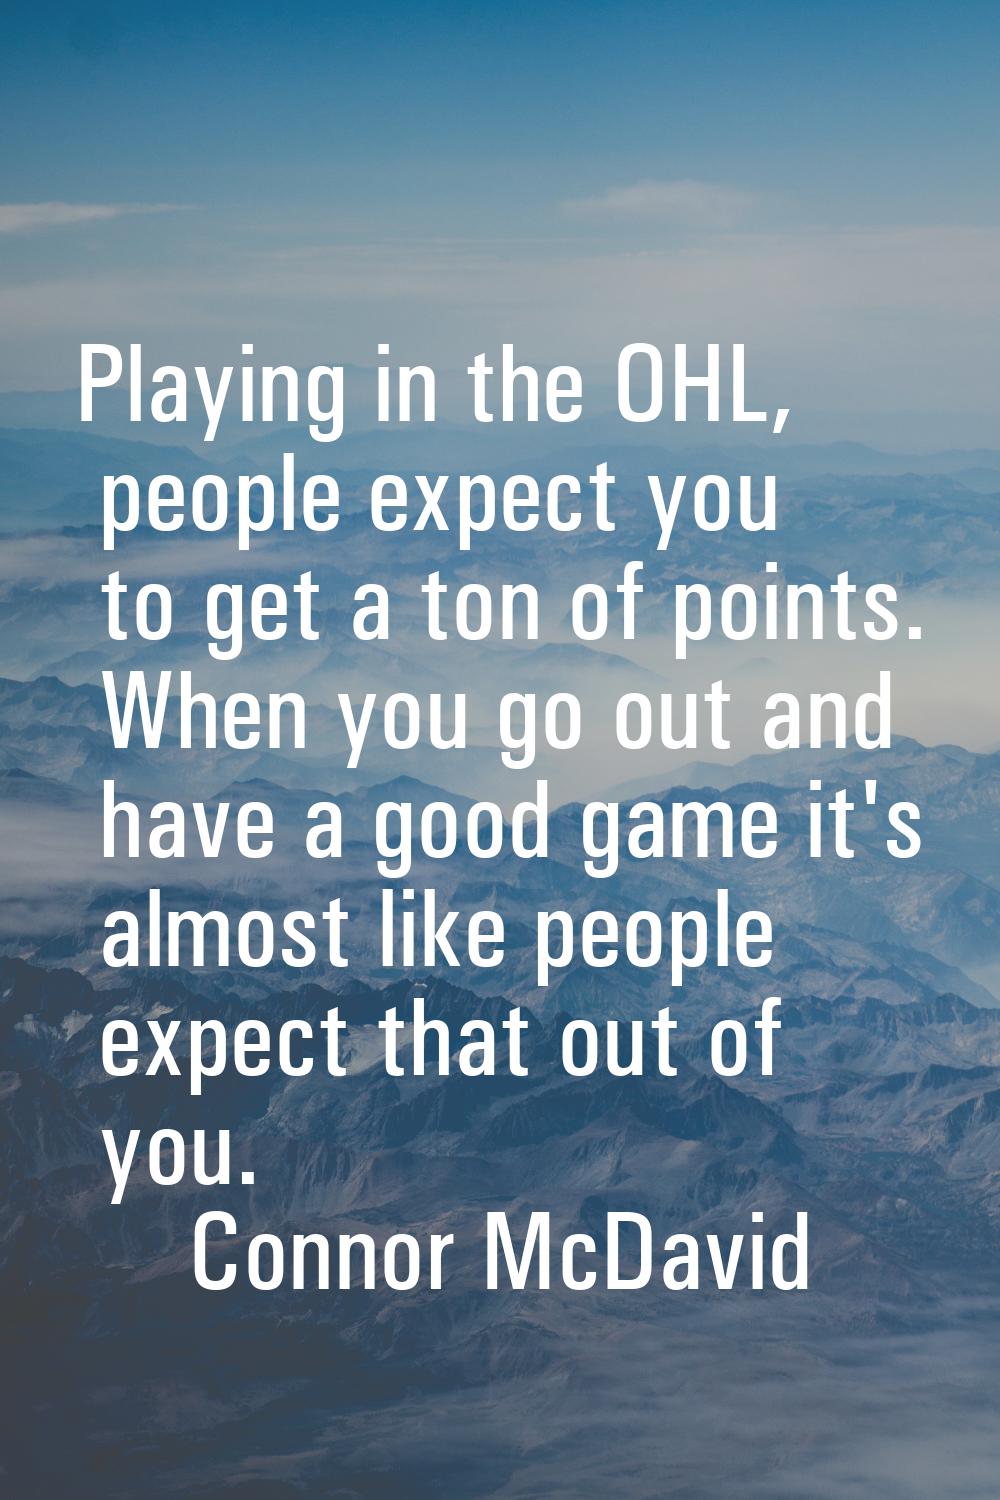 Playing in the OHL, people expect you to get a ton of points. When you go out and have a good game 